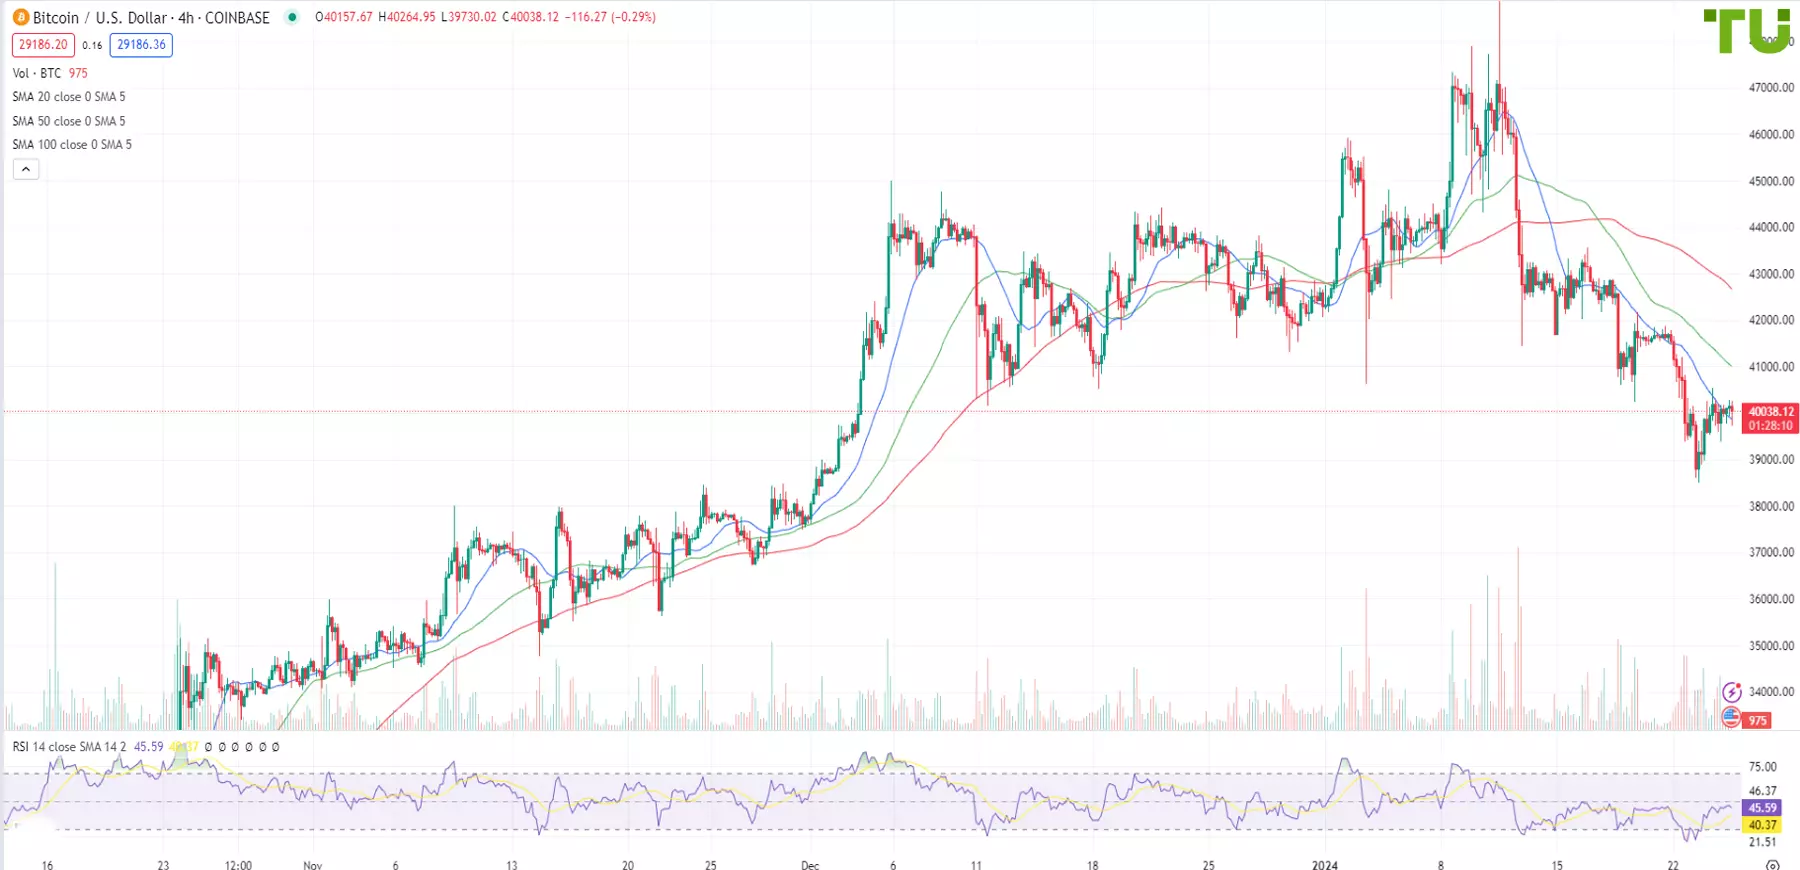 BTC/USD is trying to continue recovery after the fall